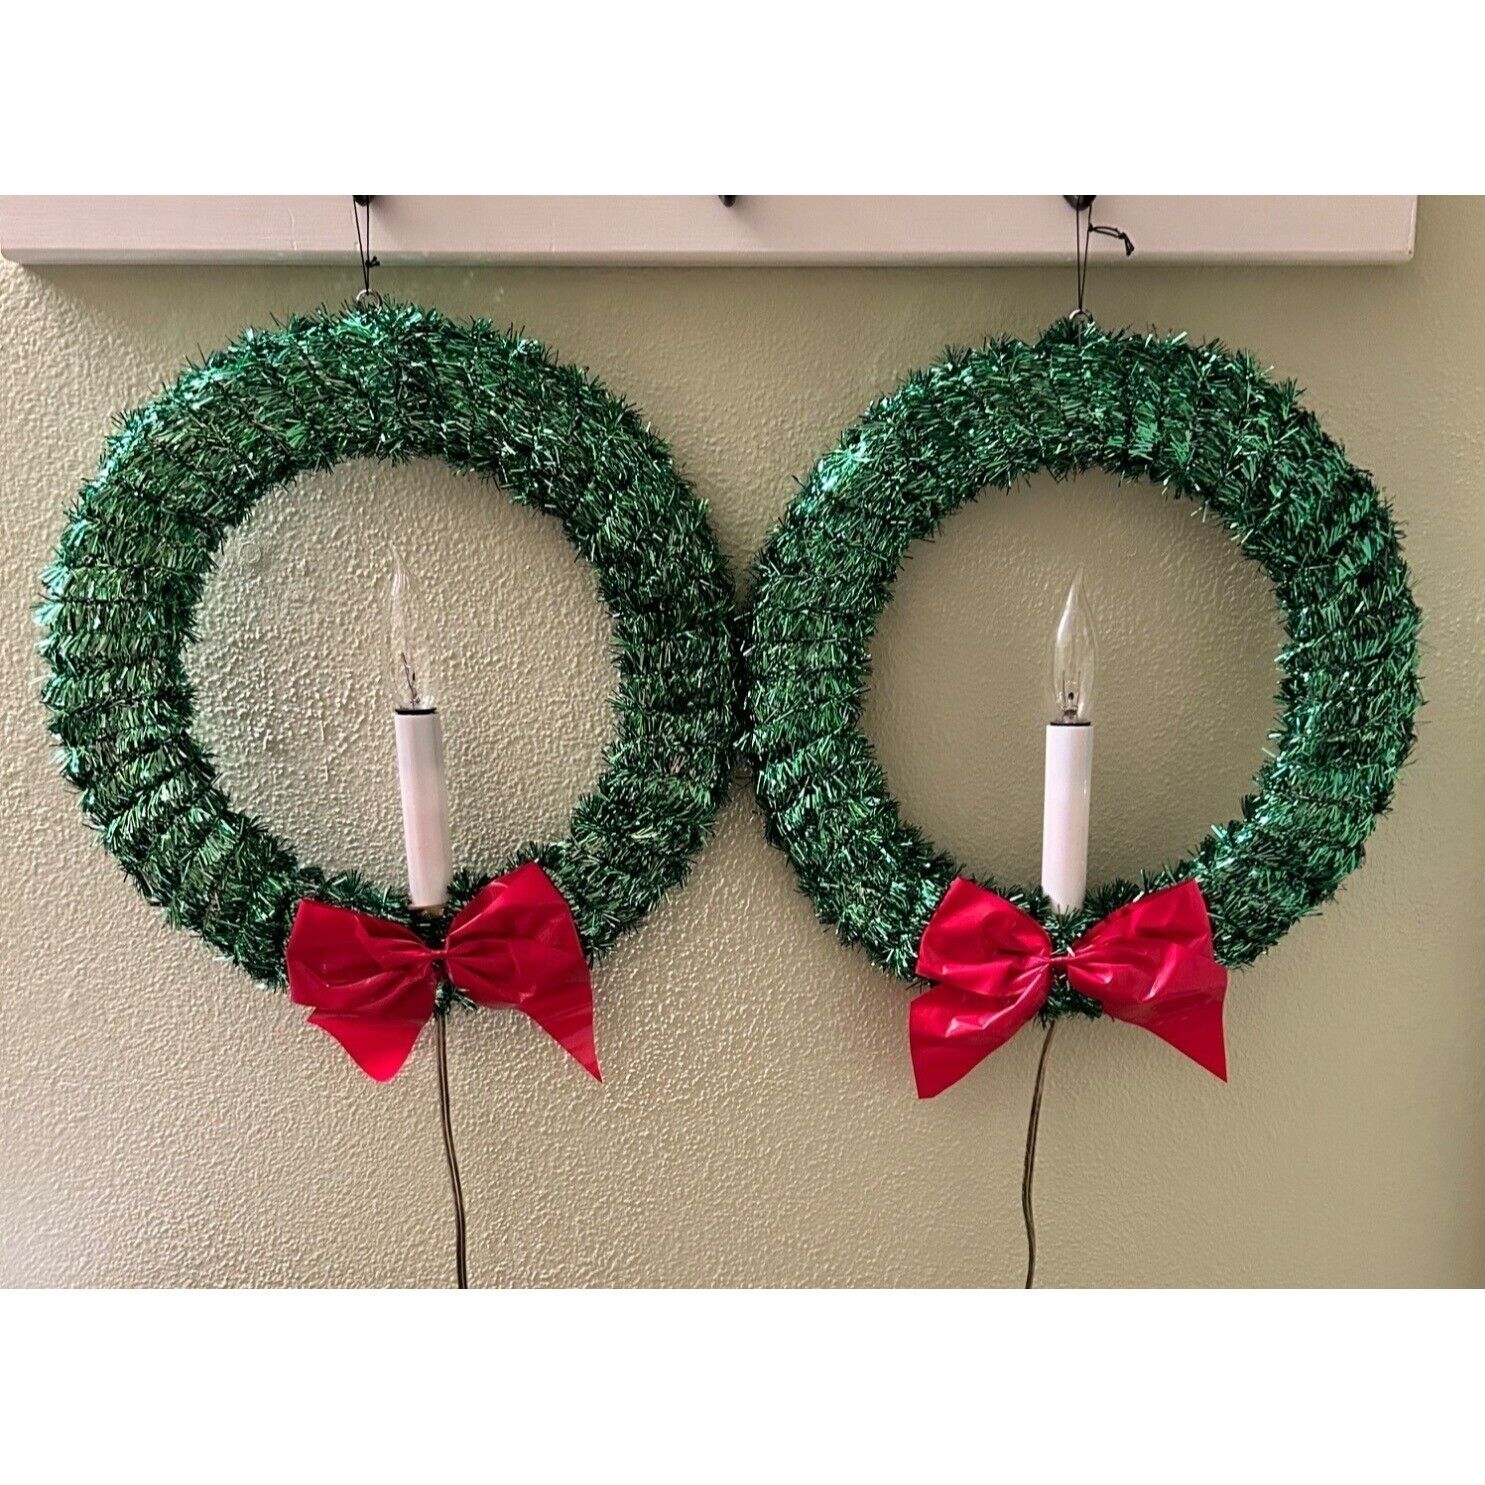 Set of 2 Green Tinsel Lighted Christmas Candle Wreath with Red Bow Works